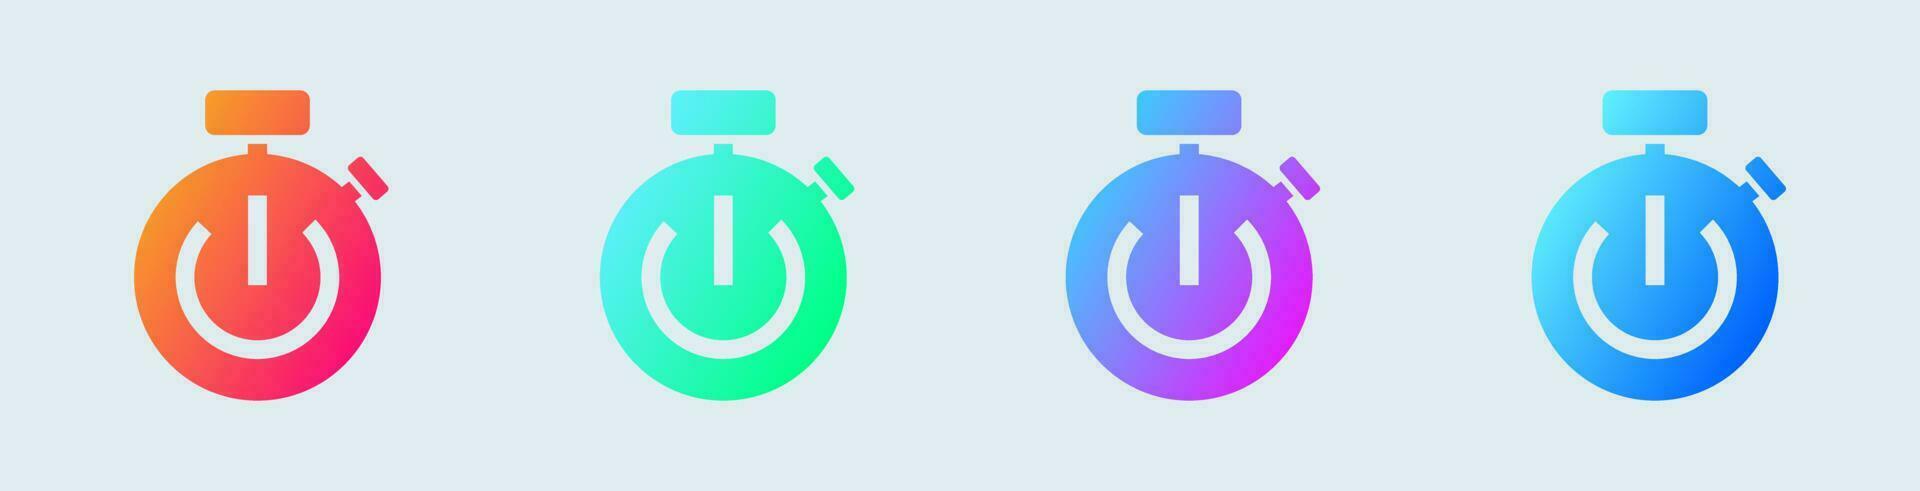 Stopwatch solid icon in gradient colors. Timer signs vector illustration.